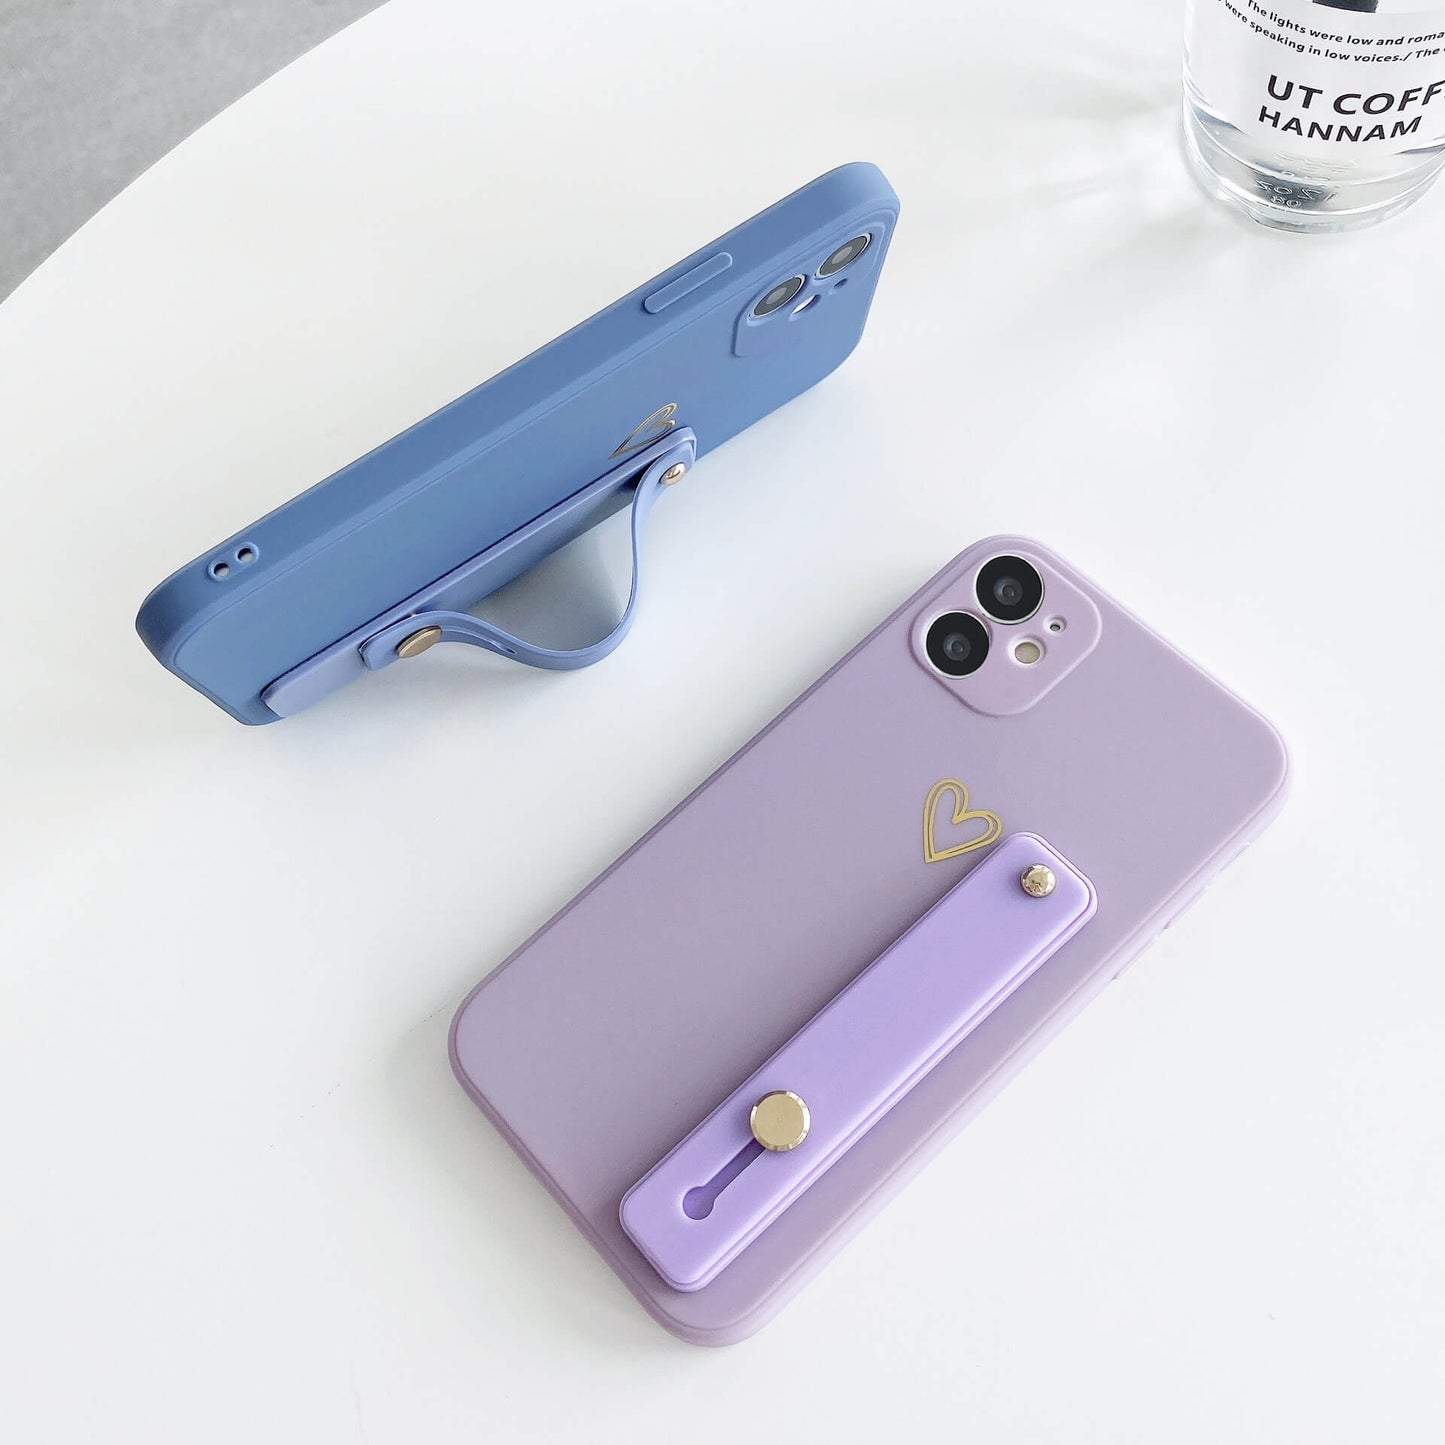 Solid Color Couple Brozing Love Heart Wrisband iPhone Case